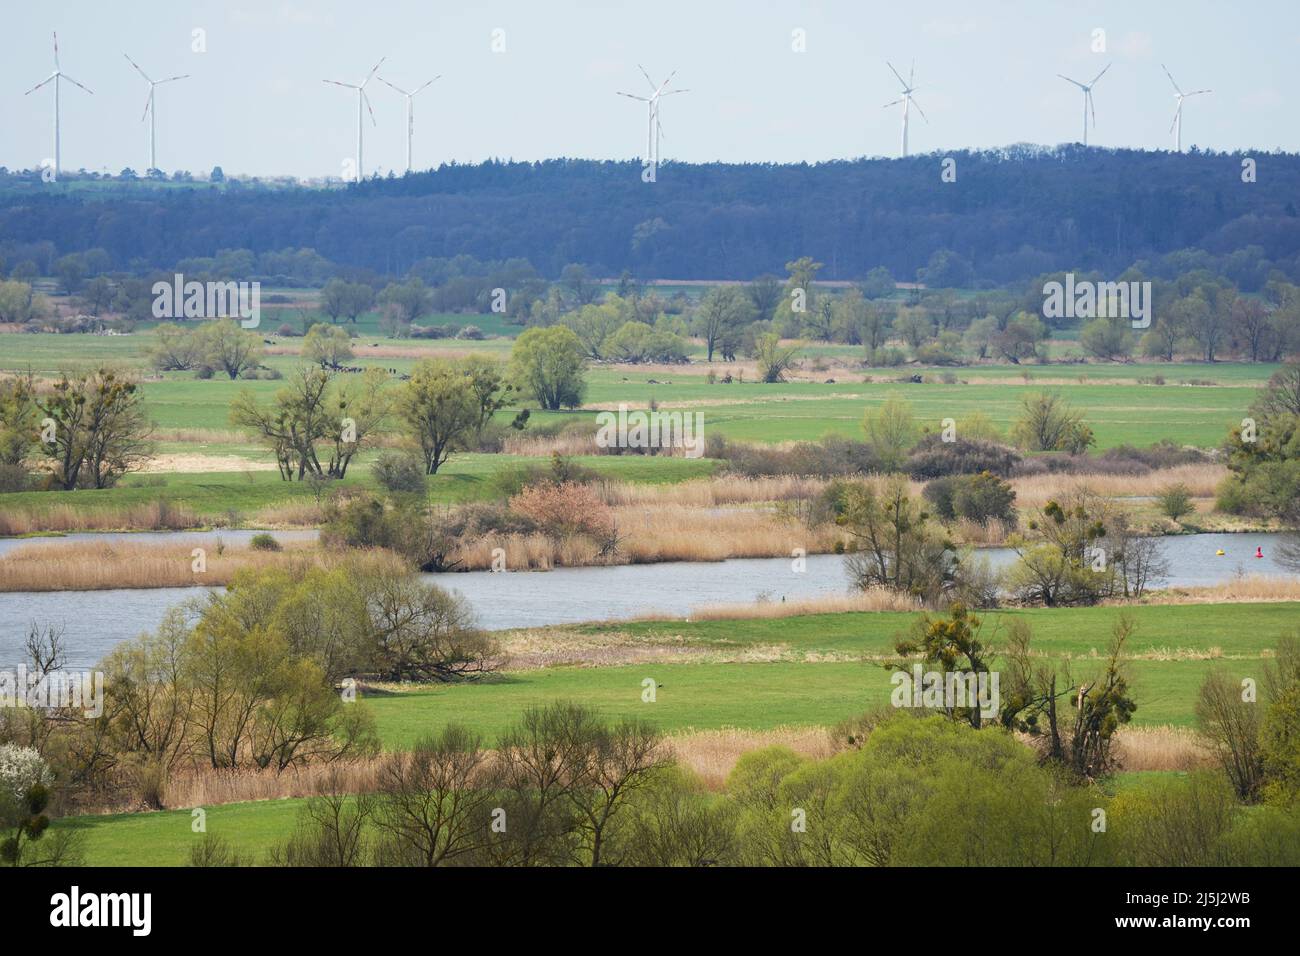 19 April 2022, Brandenburg, Schwedt/Ot Schöneberg: View from the lookout point Richterberg at the edge of the village Stützkow in the National Park Lower Oder Valley towards the Oder River. The national park has an area of about 10,300 hectares and was founded in 1995. Countless rare animal and plant species can be found here. The national park is also well developed for tourists on hiking and biking trails. Photo: Soeren Stache/dpa/ZB Stock Photo